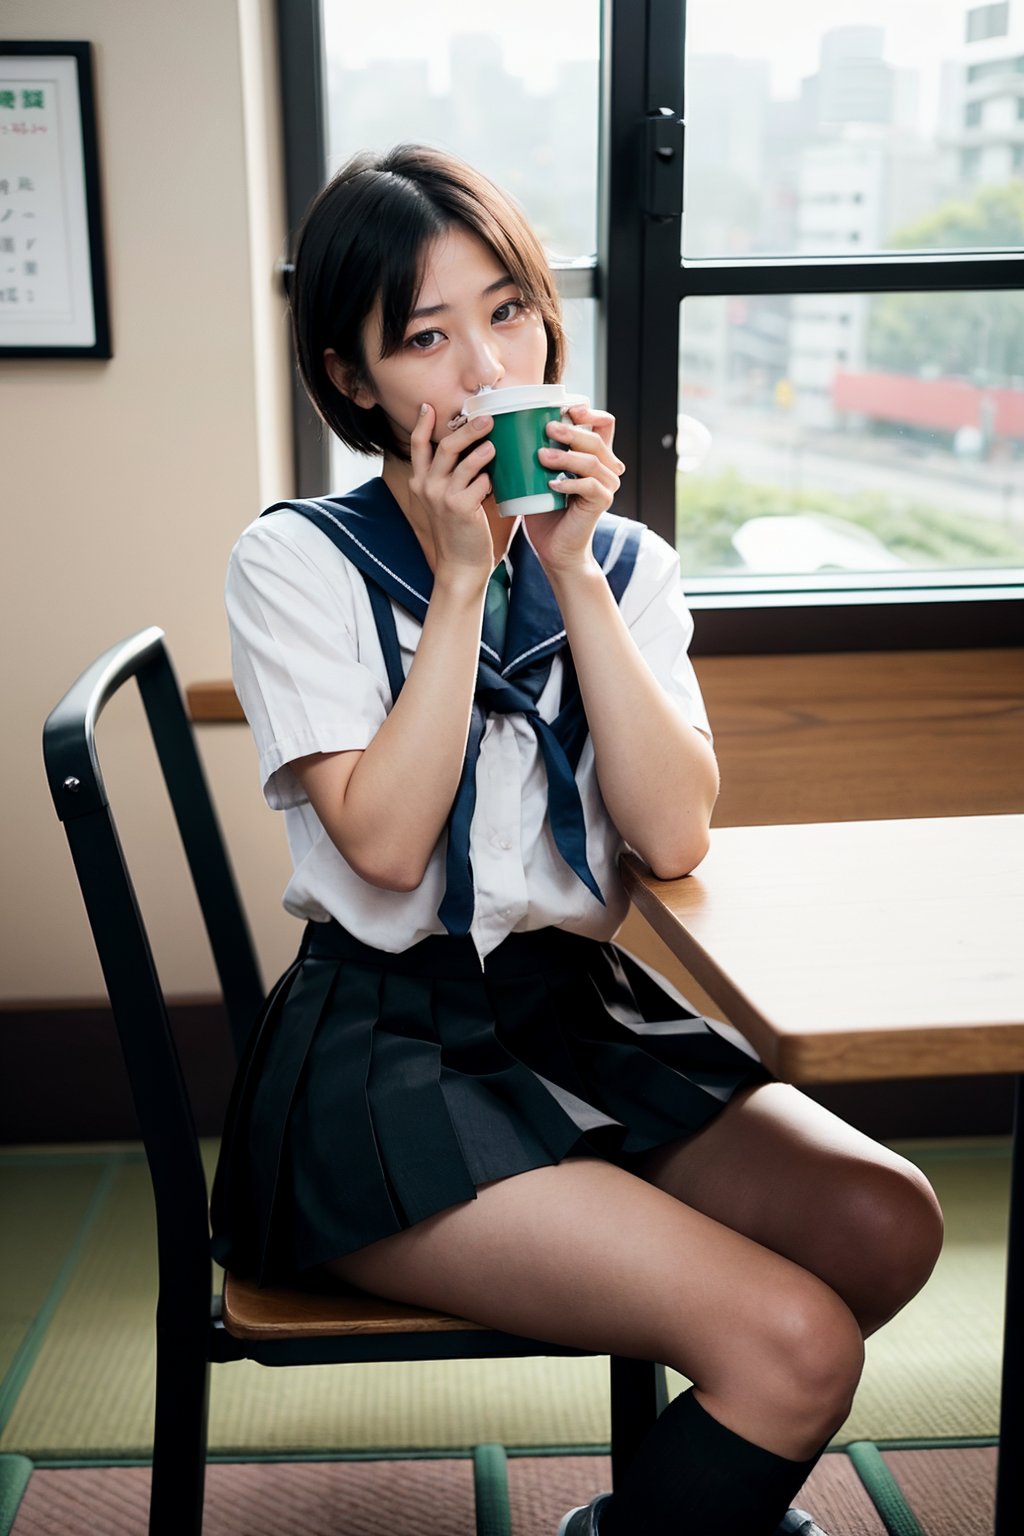 1 girl , taiwanese,  25_years old ,Asia, senior hight school, D cup, {{short_hair the ends are cut around chin length}}, Sailor suit uniform, skirt, {{4K_quality}}, ((japanese_JK_uniform)), Extremely Realistic, smaller head,studentofMisery, Fujifilm_camera , Aperture _F1.4, XF56mmF1.4 ,full-body shot, Bokeh, IG: iwakura shiori, stockings,canvas shoes, seat on the chair, {{window next to starbucks}}, Backlight, sideways ,{{ silhouette}}, indoor only sun light,time is 3P.M.,  turning head to look like a camera, No light indoors, light only form windows,Hands on the table, one hand resting on the chin, coffee cup on the table, film_style, cross her legs, Zettai Ryōiki